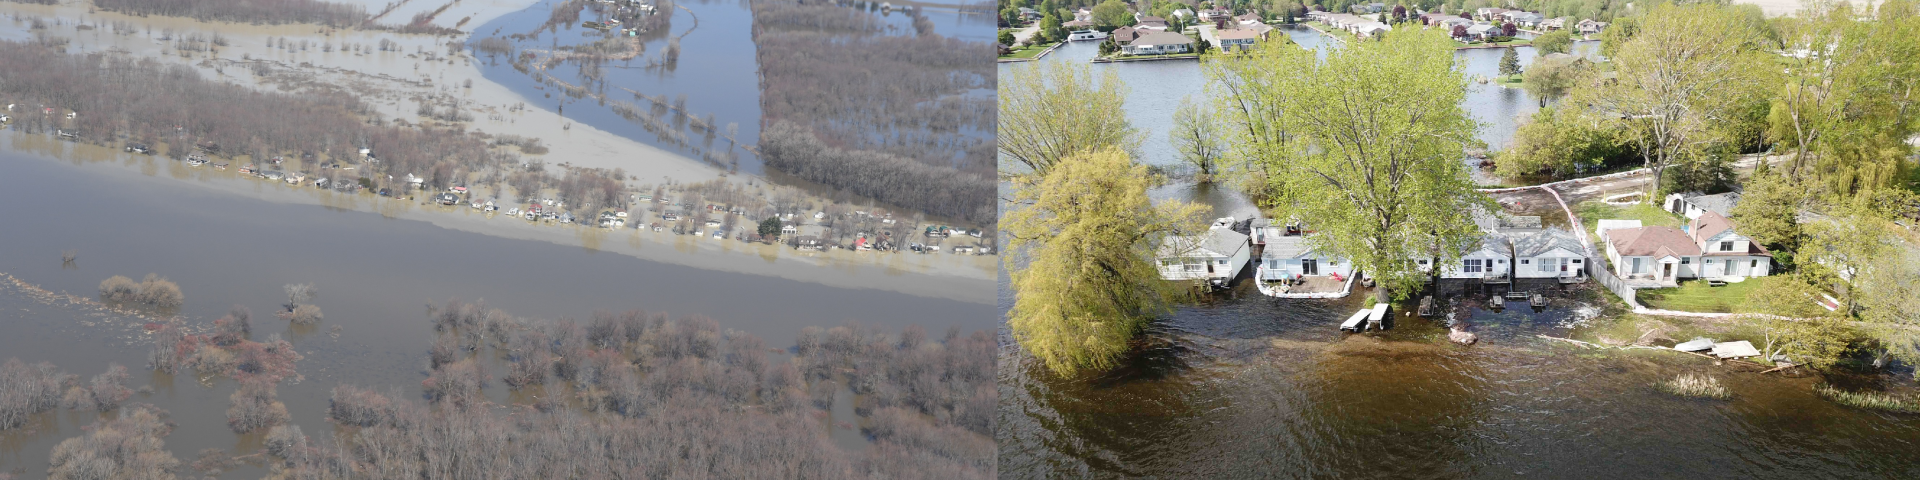 May 2019 St. Lawrence River at Lake Saint-Pierre (left, source: Lower Trent Region Conservation Authority) and Lake Ontario at Brighton (right, source: Transport Canada)